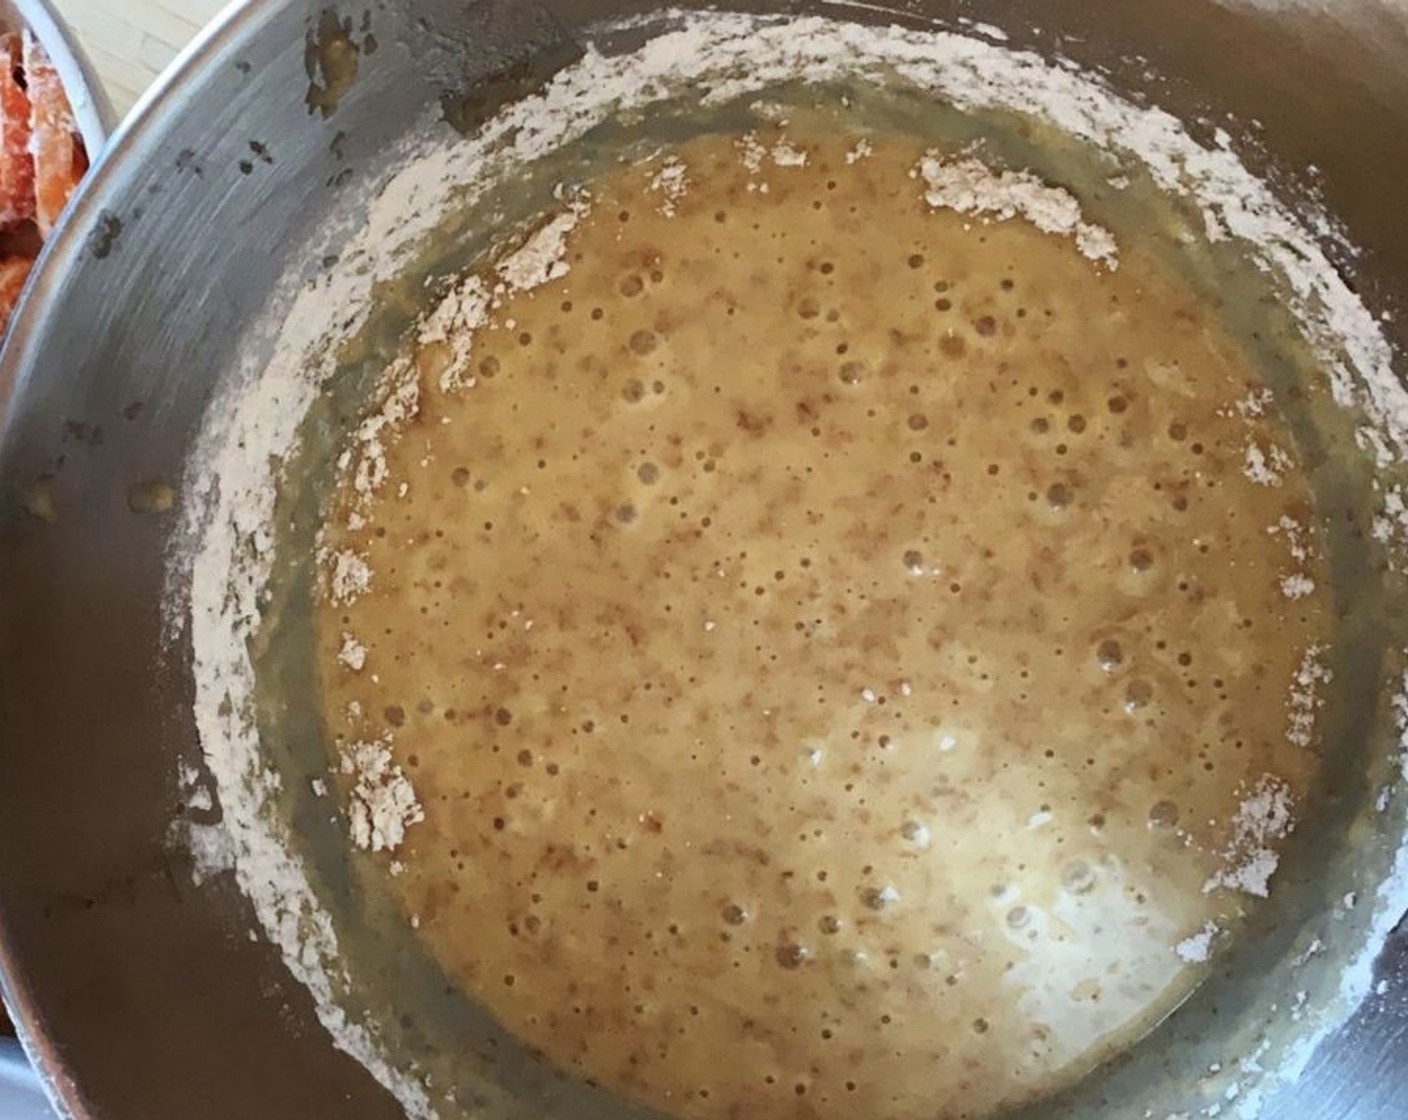 step 3 Gently stir in Baking Powder (1 Tbsp) and Vanilla Extract (1/2 tsp). Then slowly incorporate Whole Wheat Flour (1 1/3 cups), Cake Flour (1/2 cup), Coconut Oil (1/2 cup), and Water (1/2 cup).